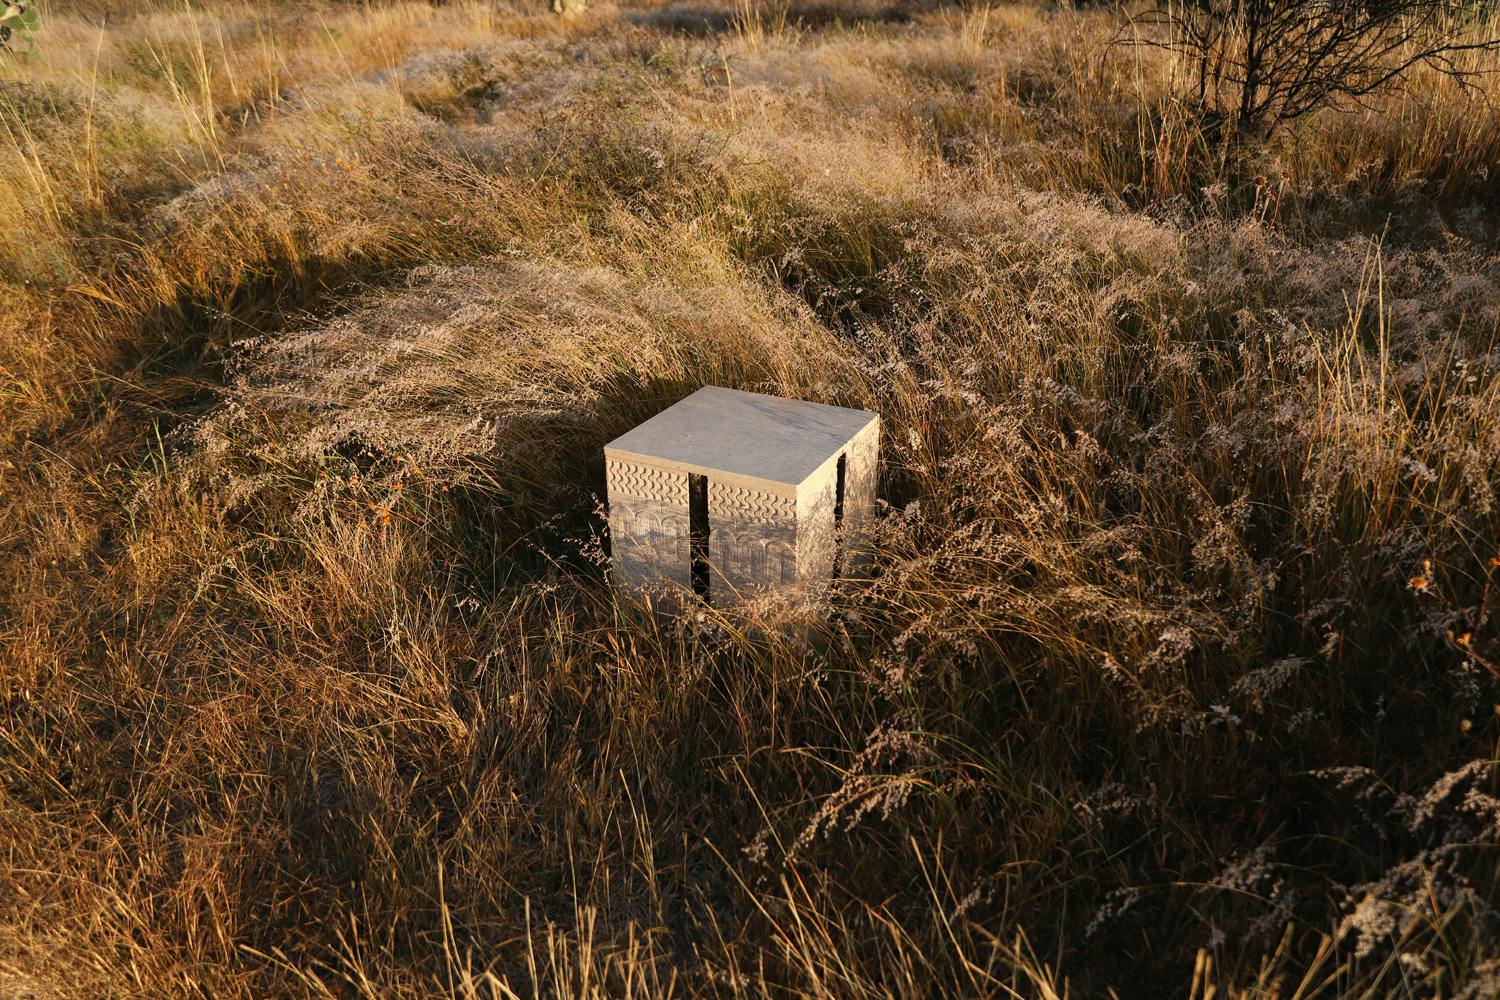 LANDIN Stone Side Table sits in the warm mexican sun in a field of grass